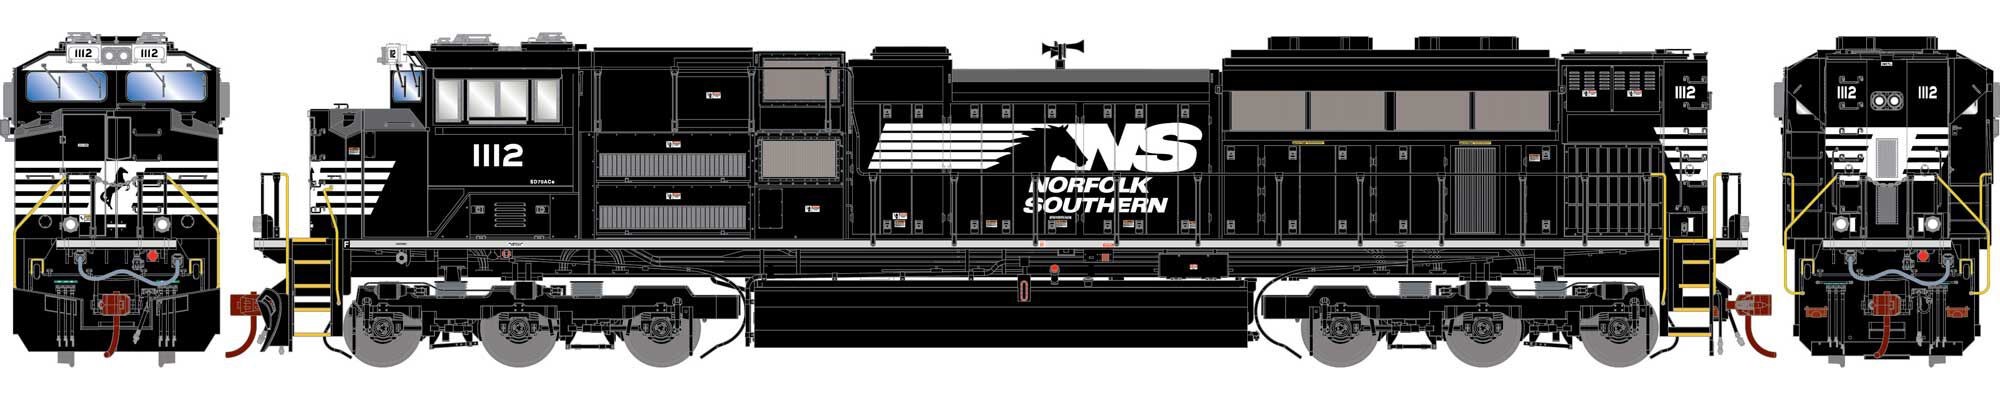 Athearn Genesis HO ATHG75838 DCC/Tsunami 2 Sound Equipped EMD SD70ACe Locomotive Norfolk Southern NS #1112